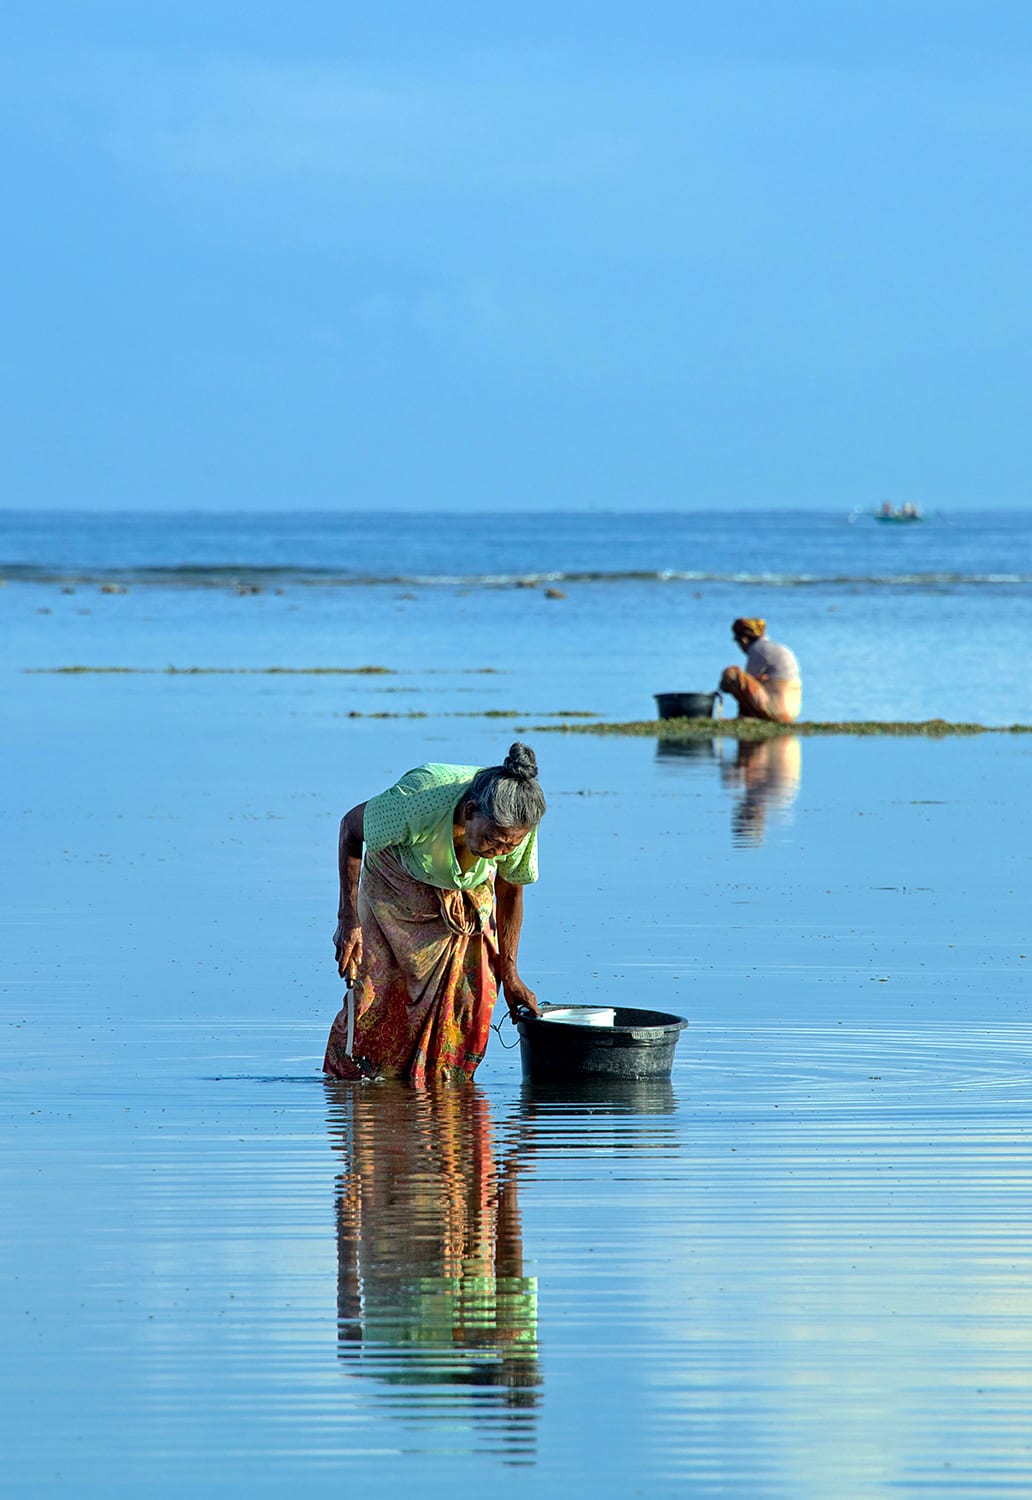 Women collecting shellfish in Lombok, Indonesia. (Photo by A. David South © Alamy)